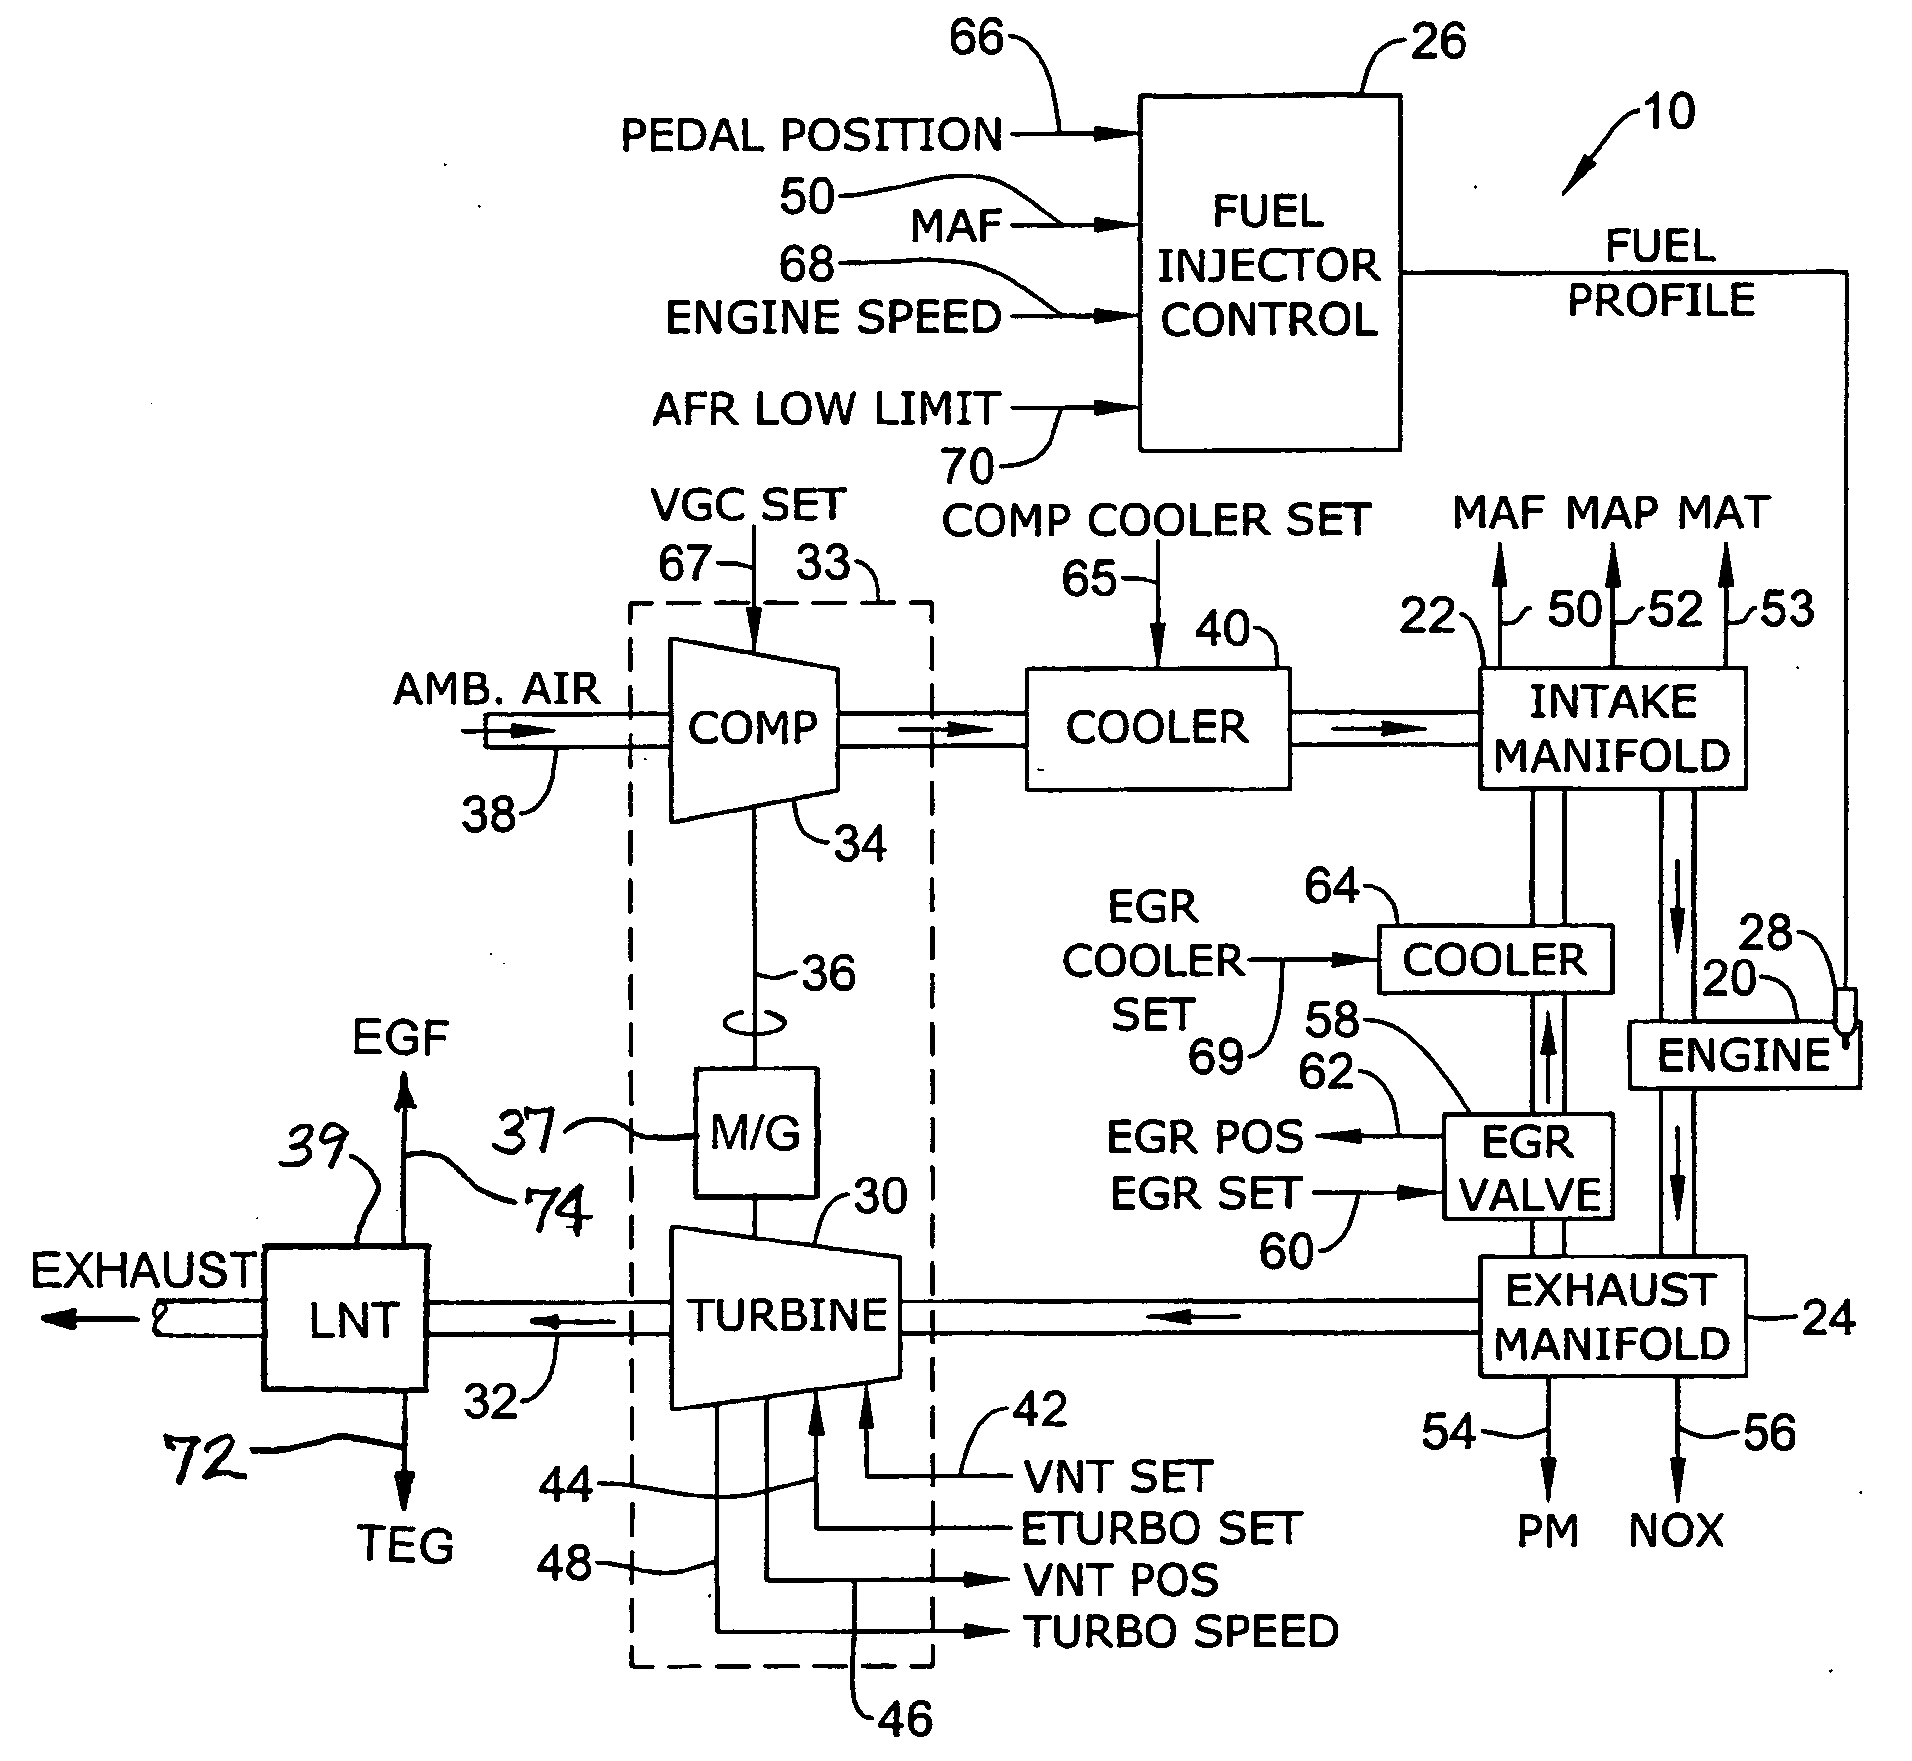 Control of exhaust temperature for after-treatment process in an e-turbo system